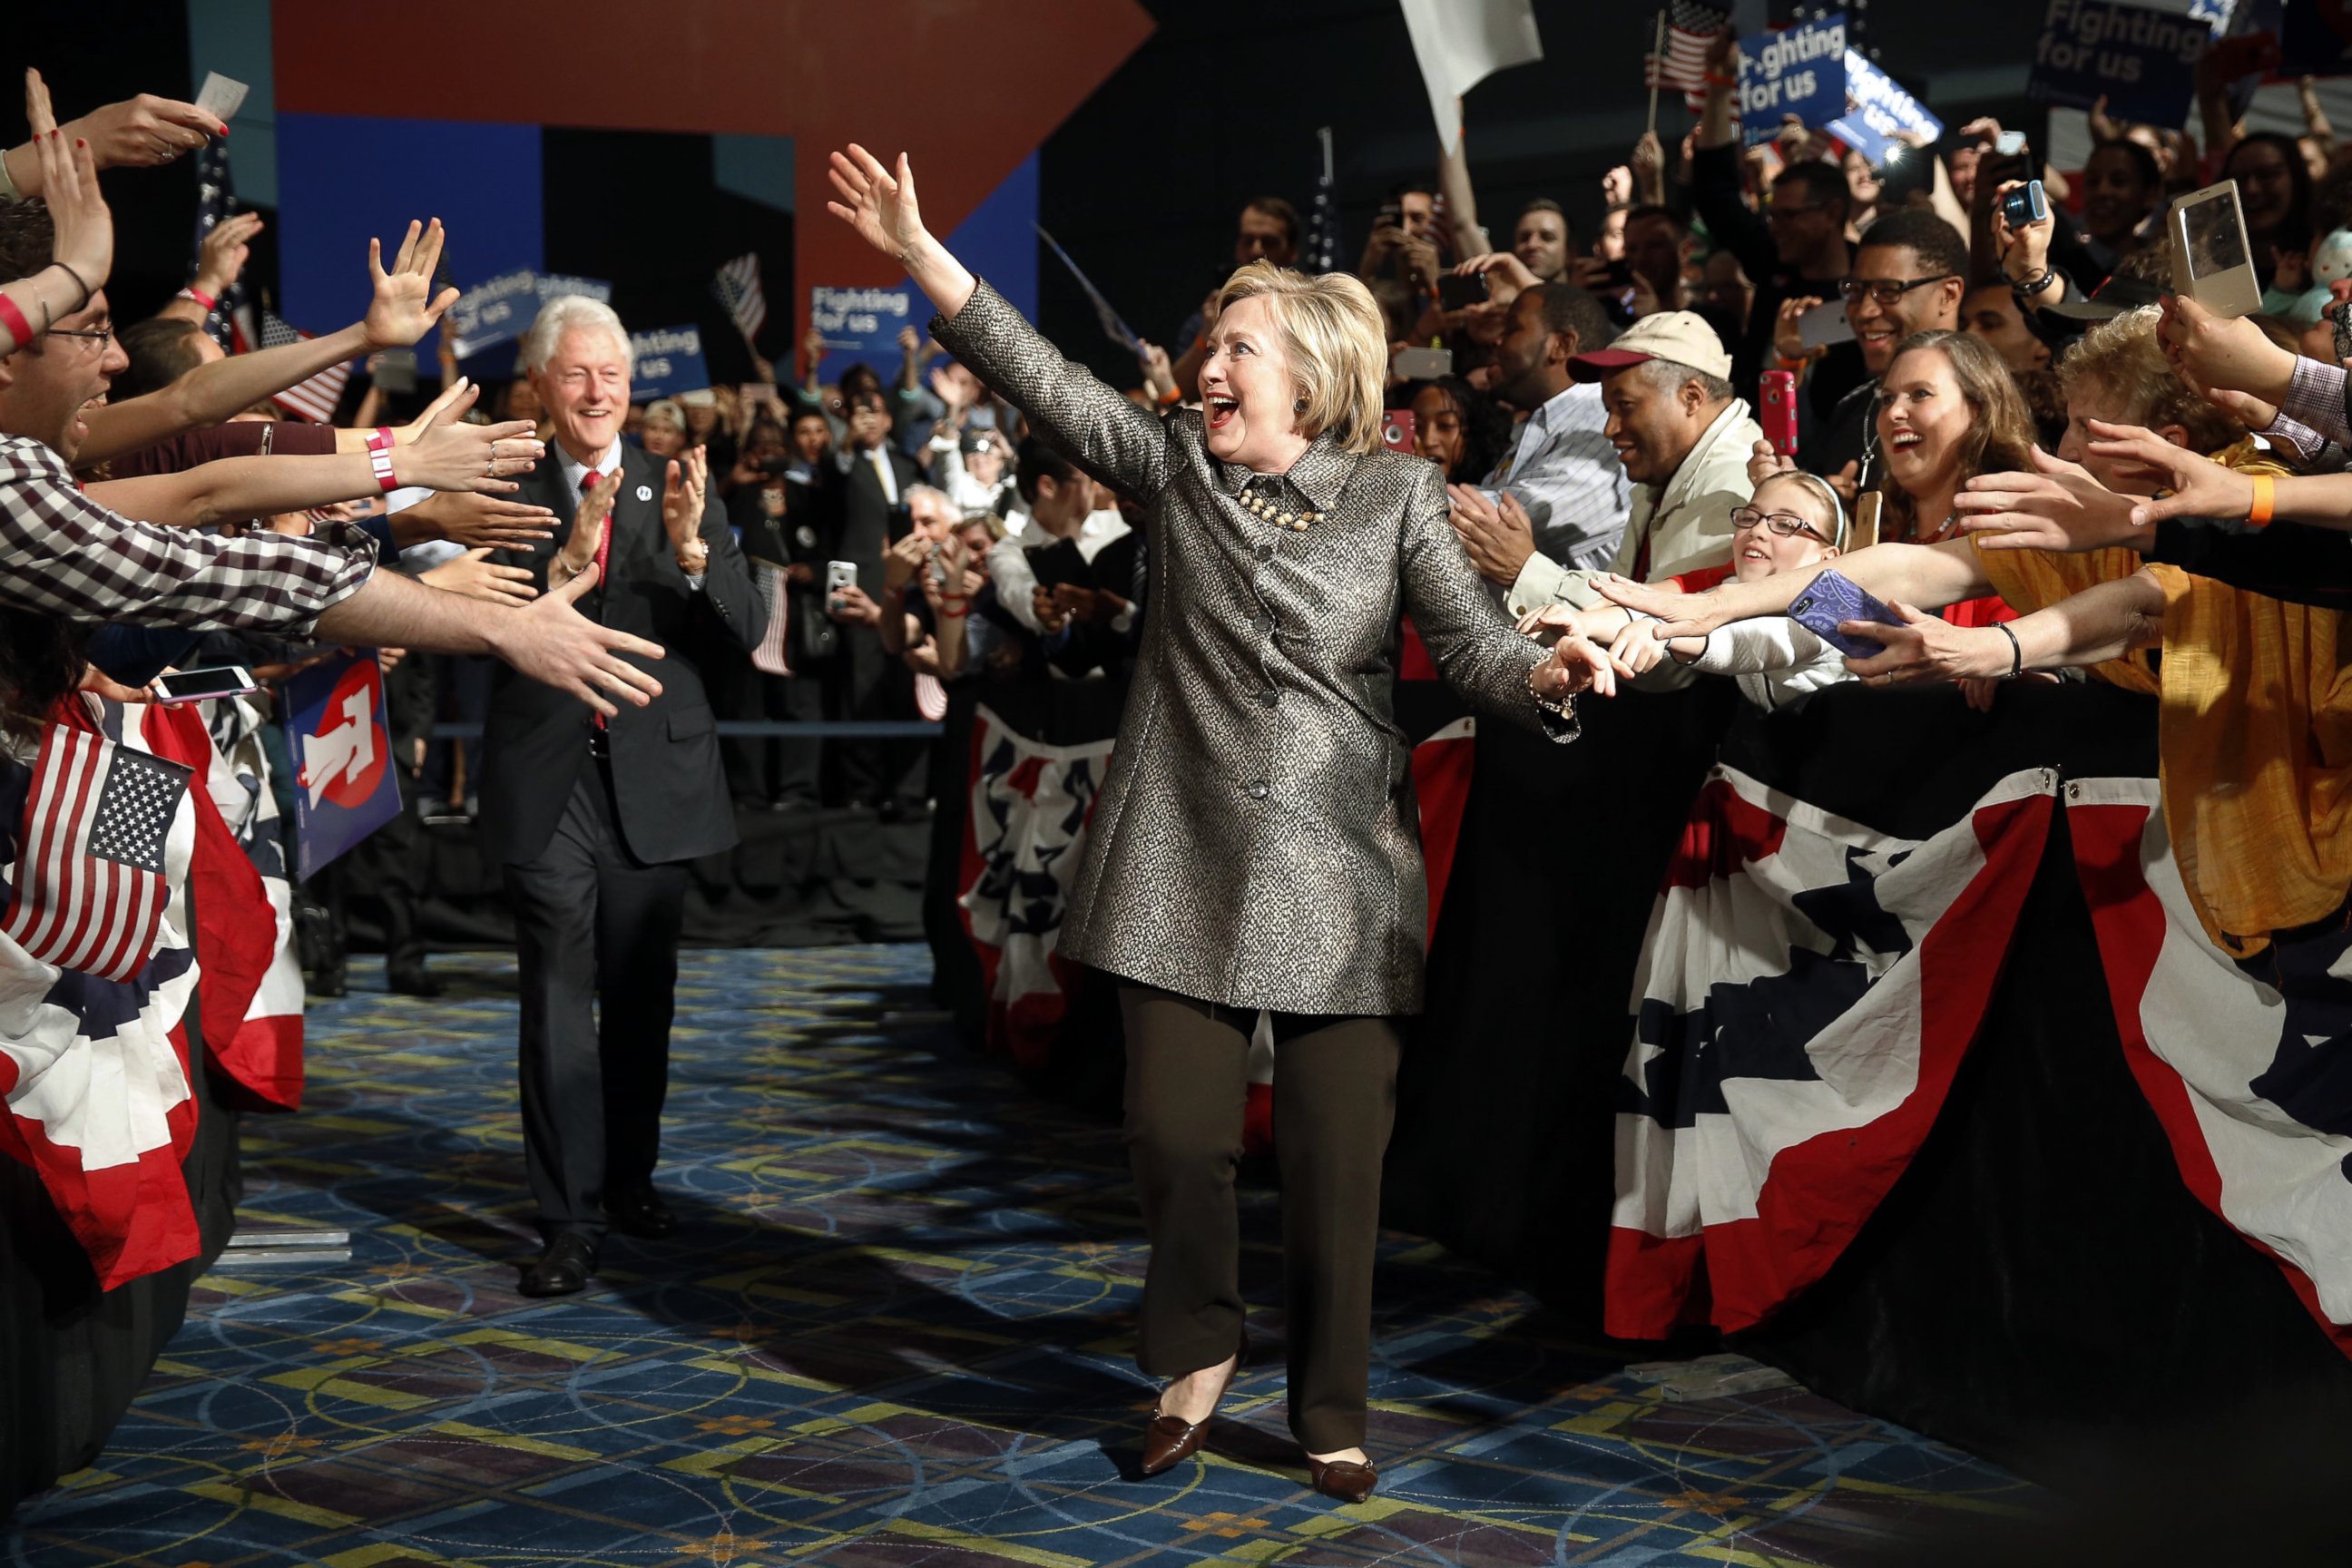 PHOTO: Democratic presidential candidate Hillary Clinton accompanied by former President Bill Clinton walks to stage at her presidential primary election night rally in Philadelphia on April 26, 2016.